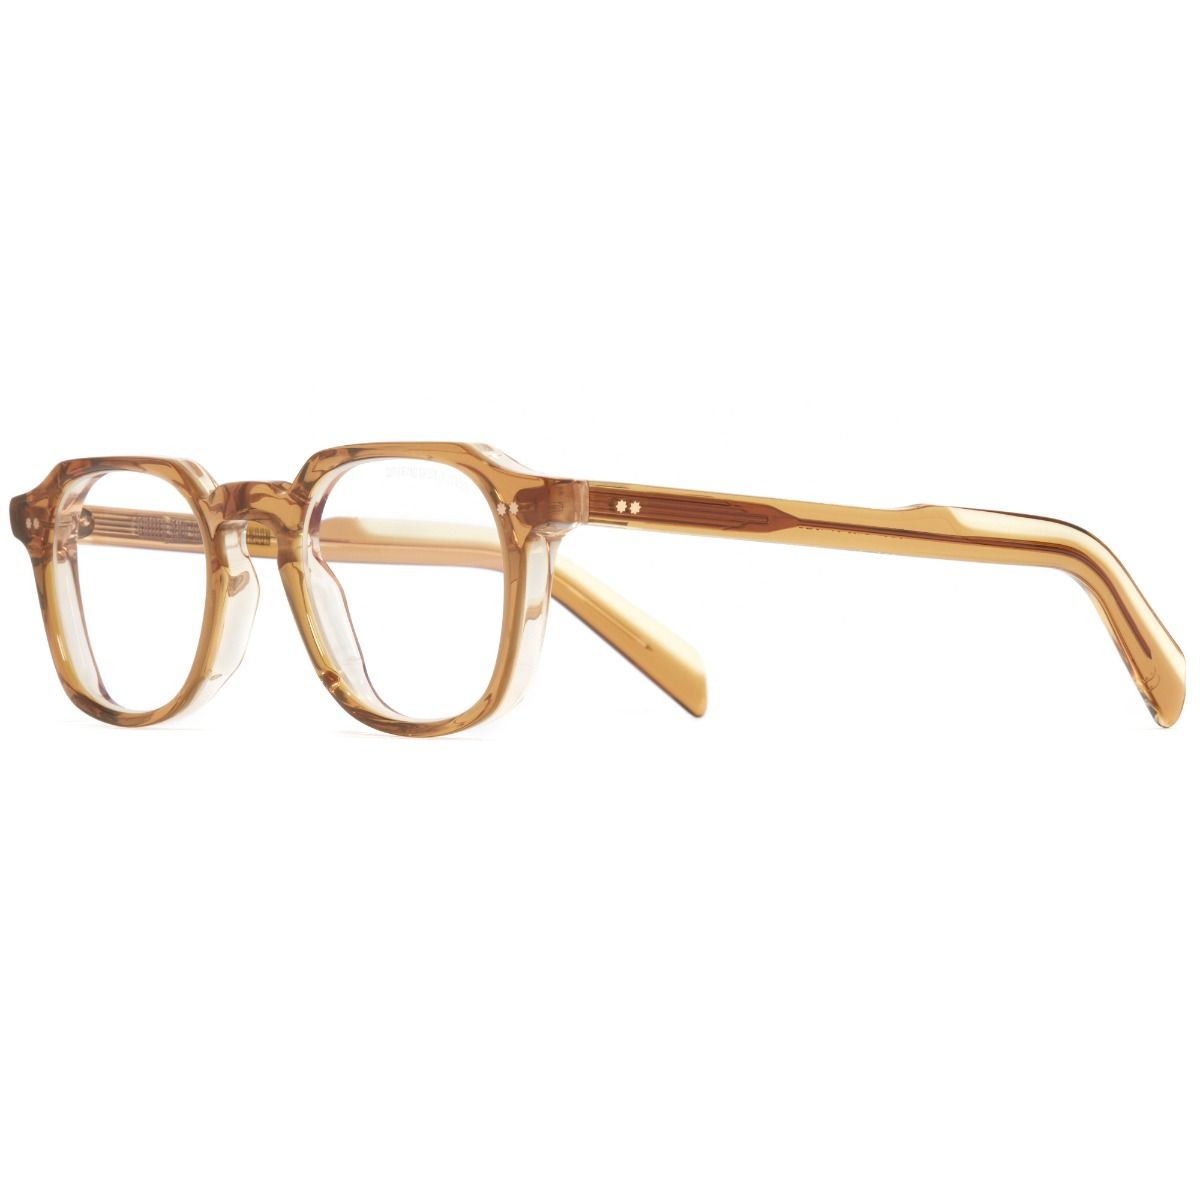 GR03 Square Optical Glasses - Multi Yellow by Cutler and Gross